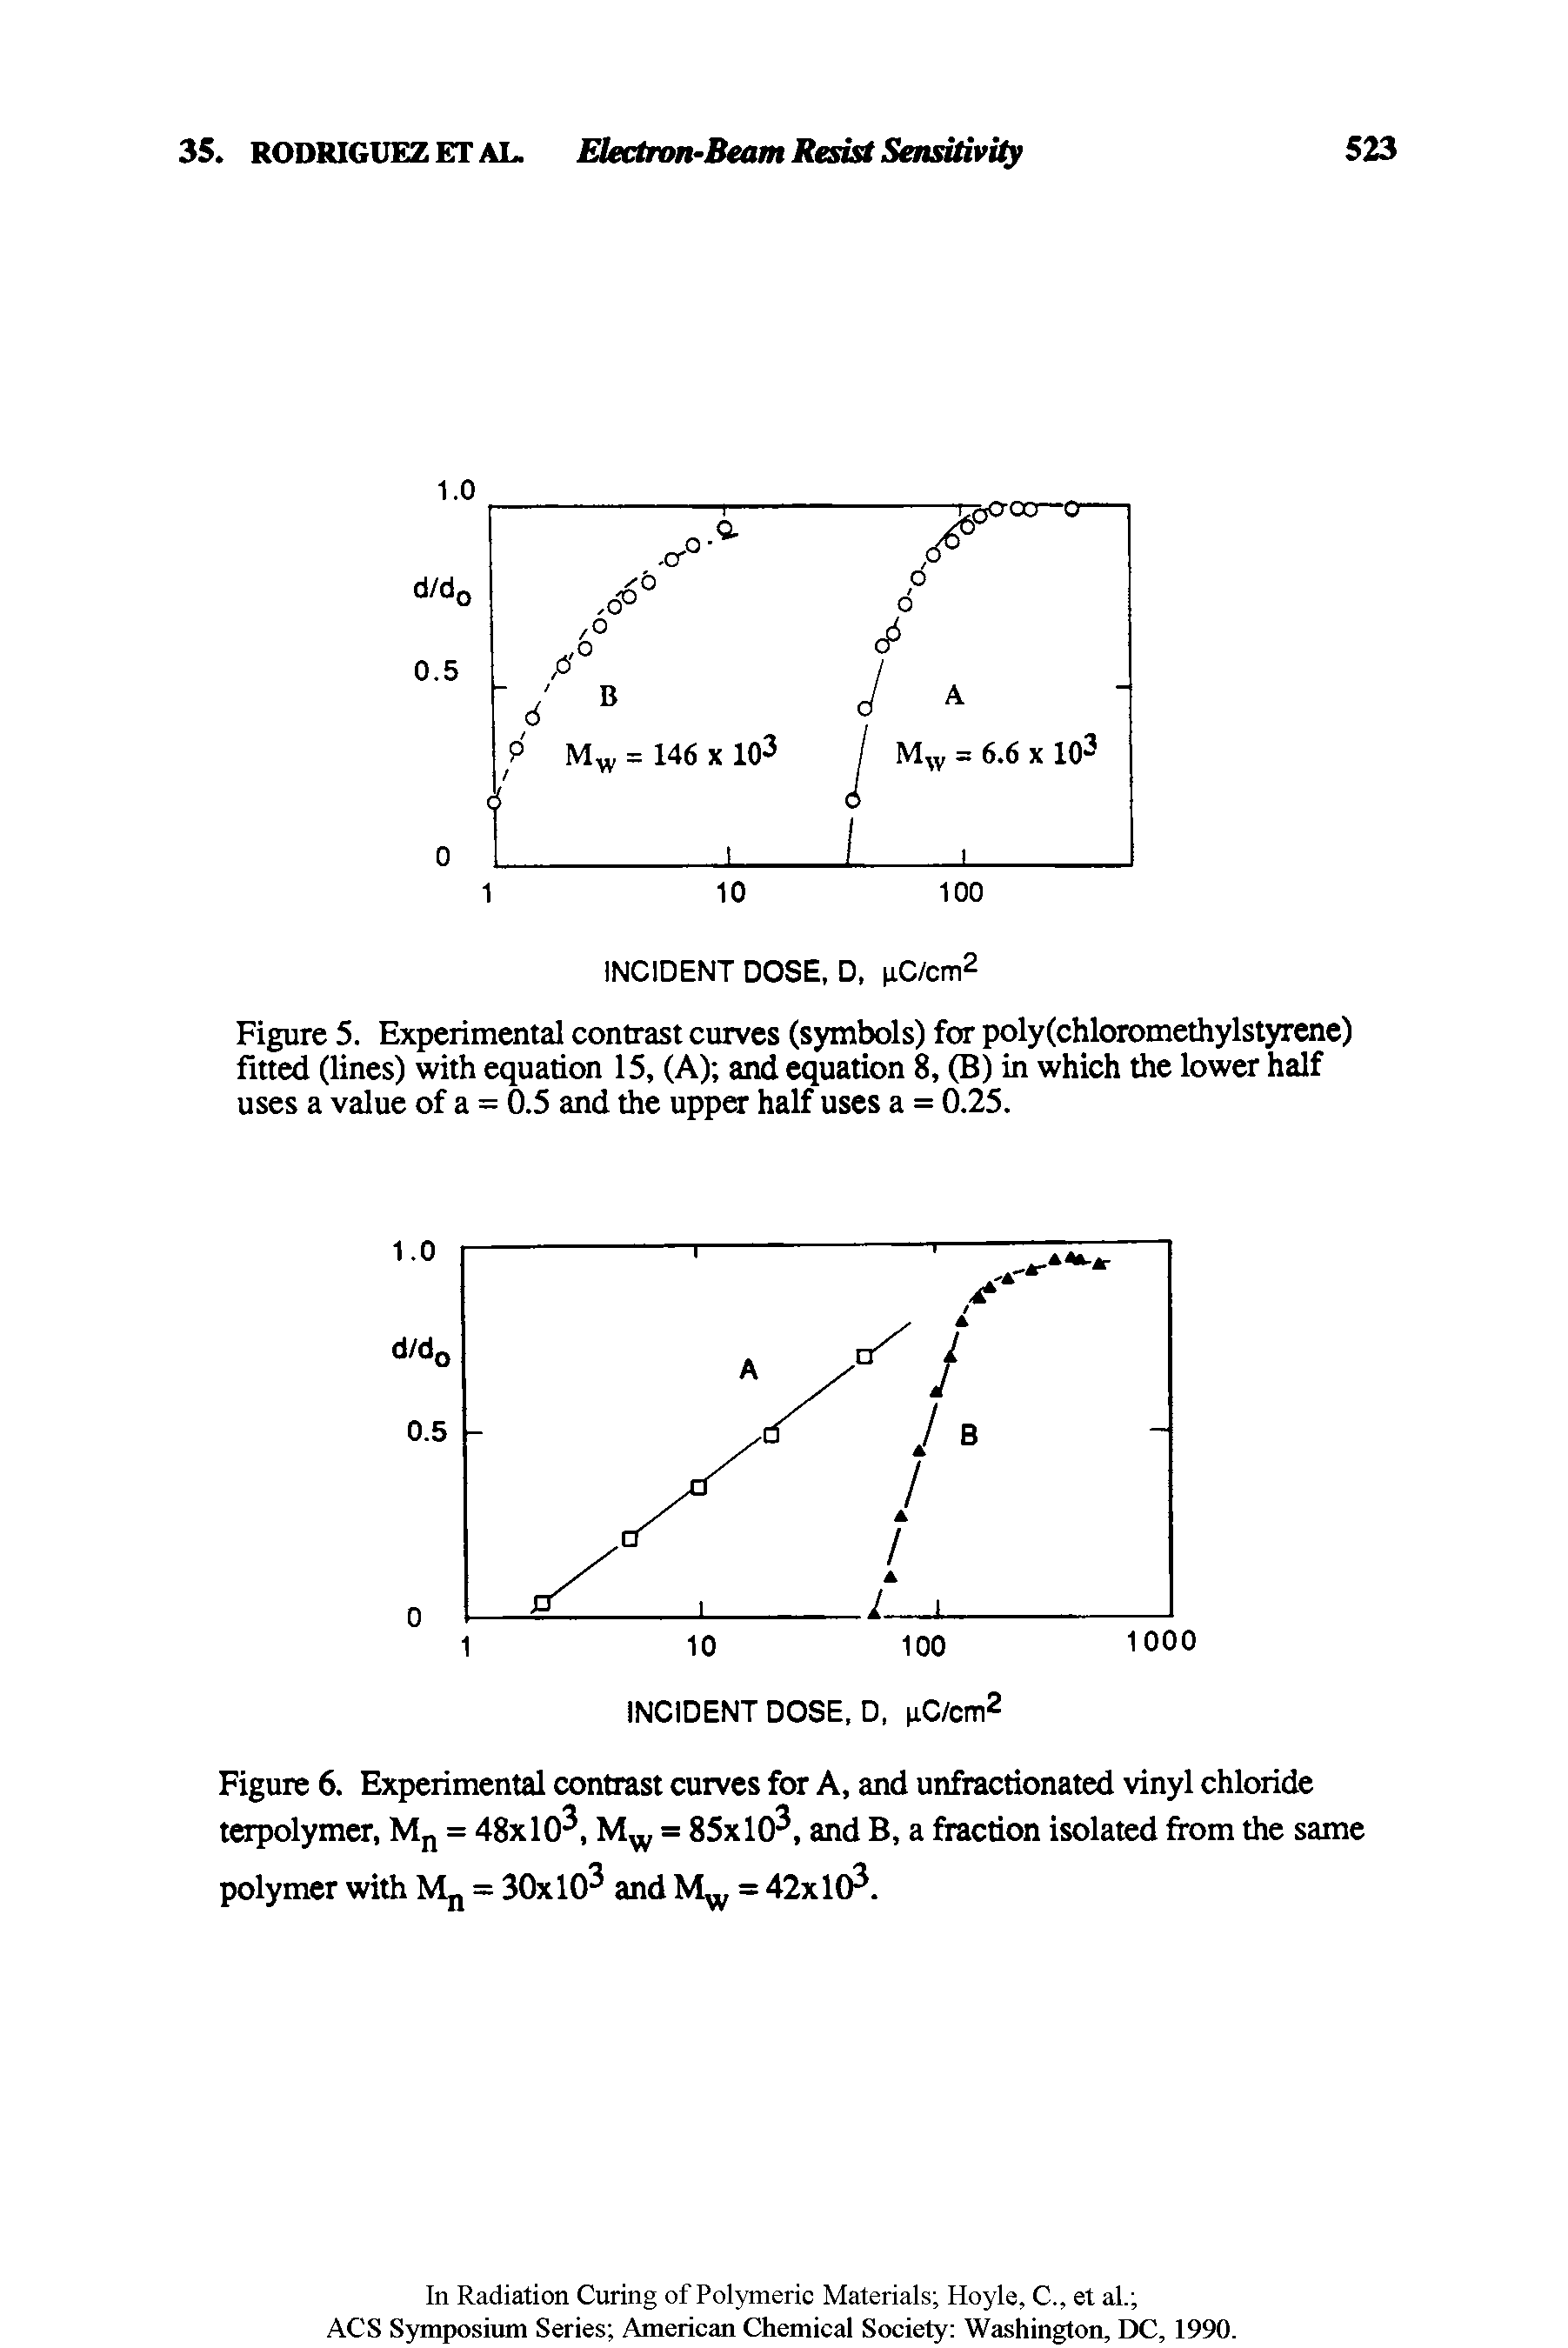 Figure 6. Experimental contrast curves for A, and unfractionated vinyl chloride terpolymer, Mjj = 48x10, = 85x10, and B, a fraction isolated from the same...